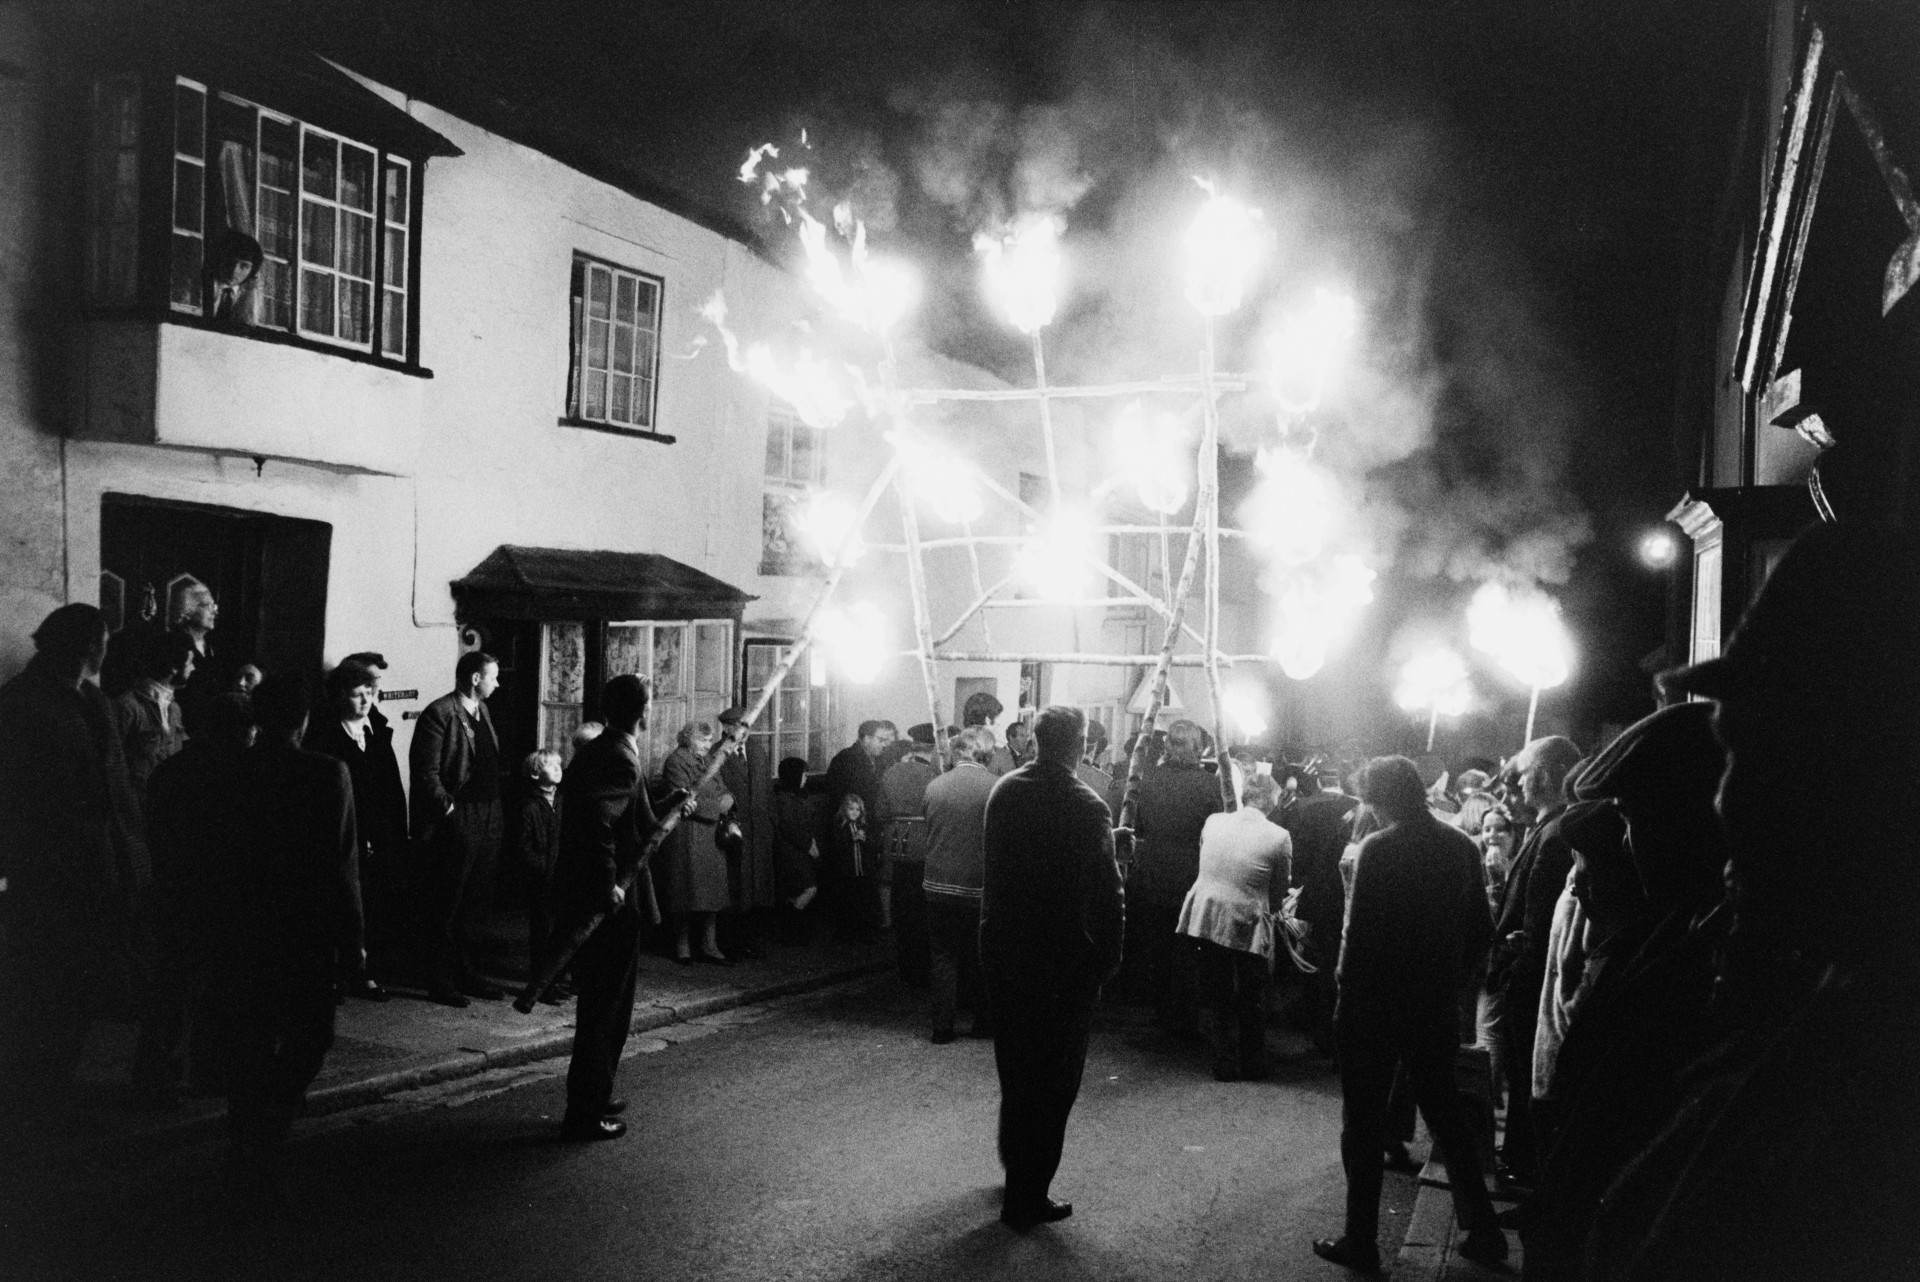 Spectators watching men carrying a wooden frame with flaming torches, in a torchlight procession through a street at Hatherleigh Carnival, at night.